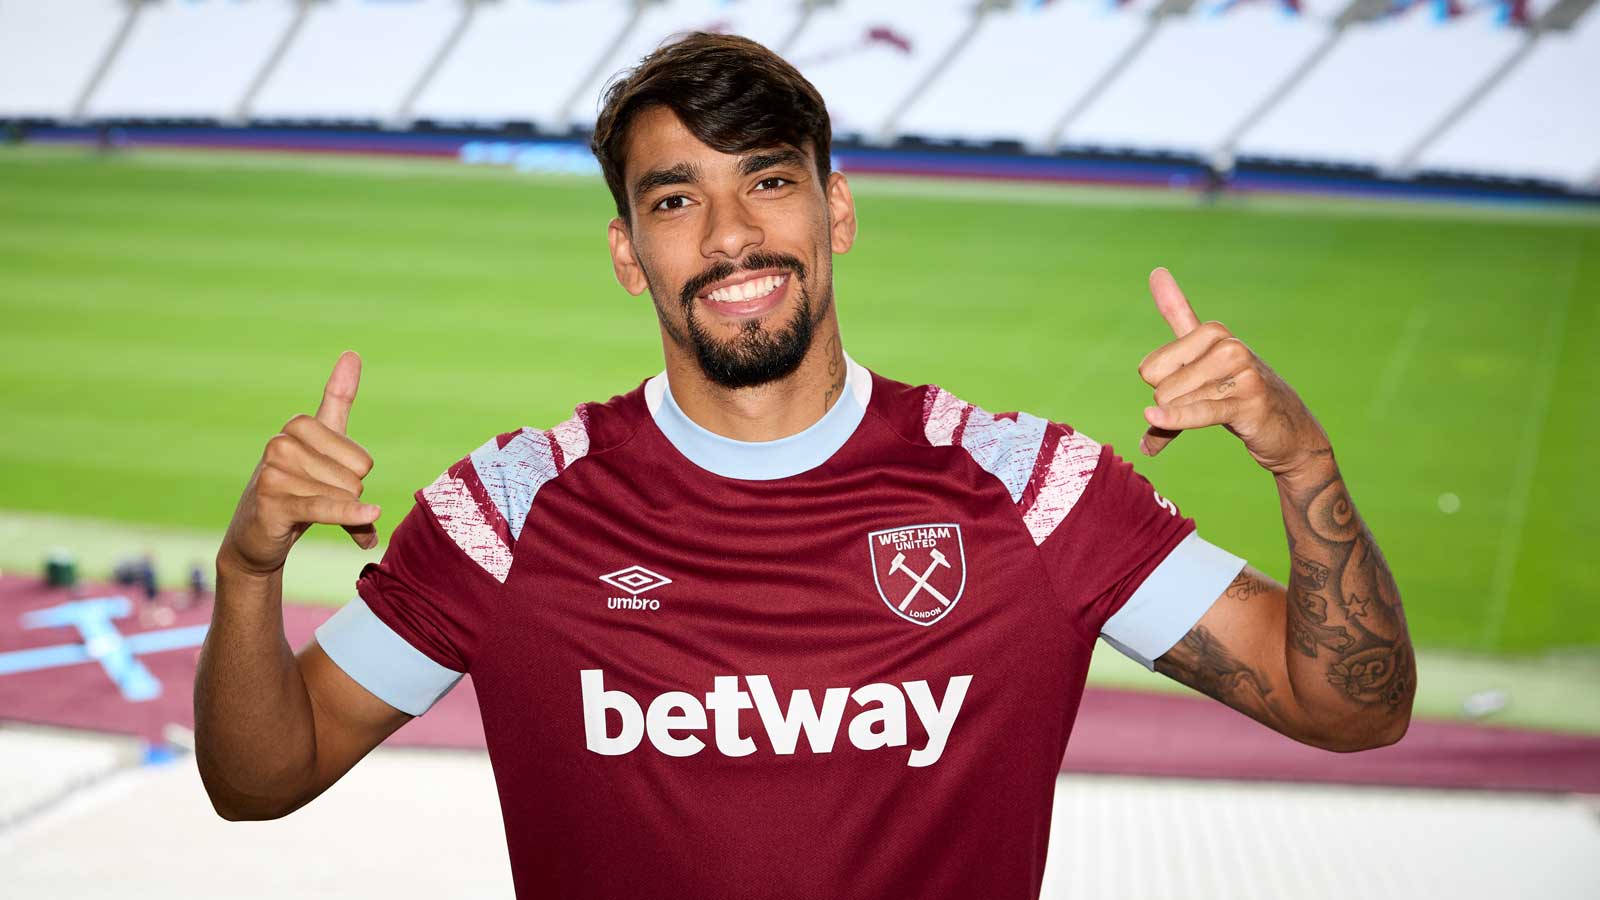 Lucas Paquetá: I will give everything to perform well | West Ham United F.C.